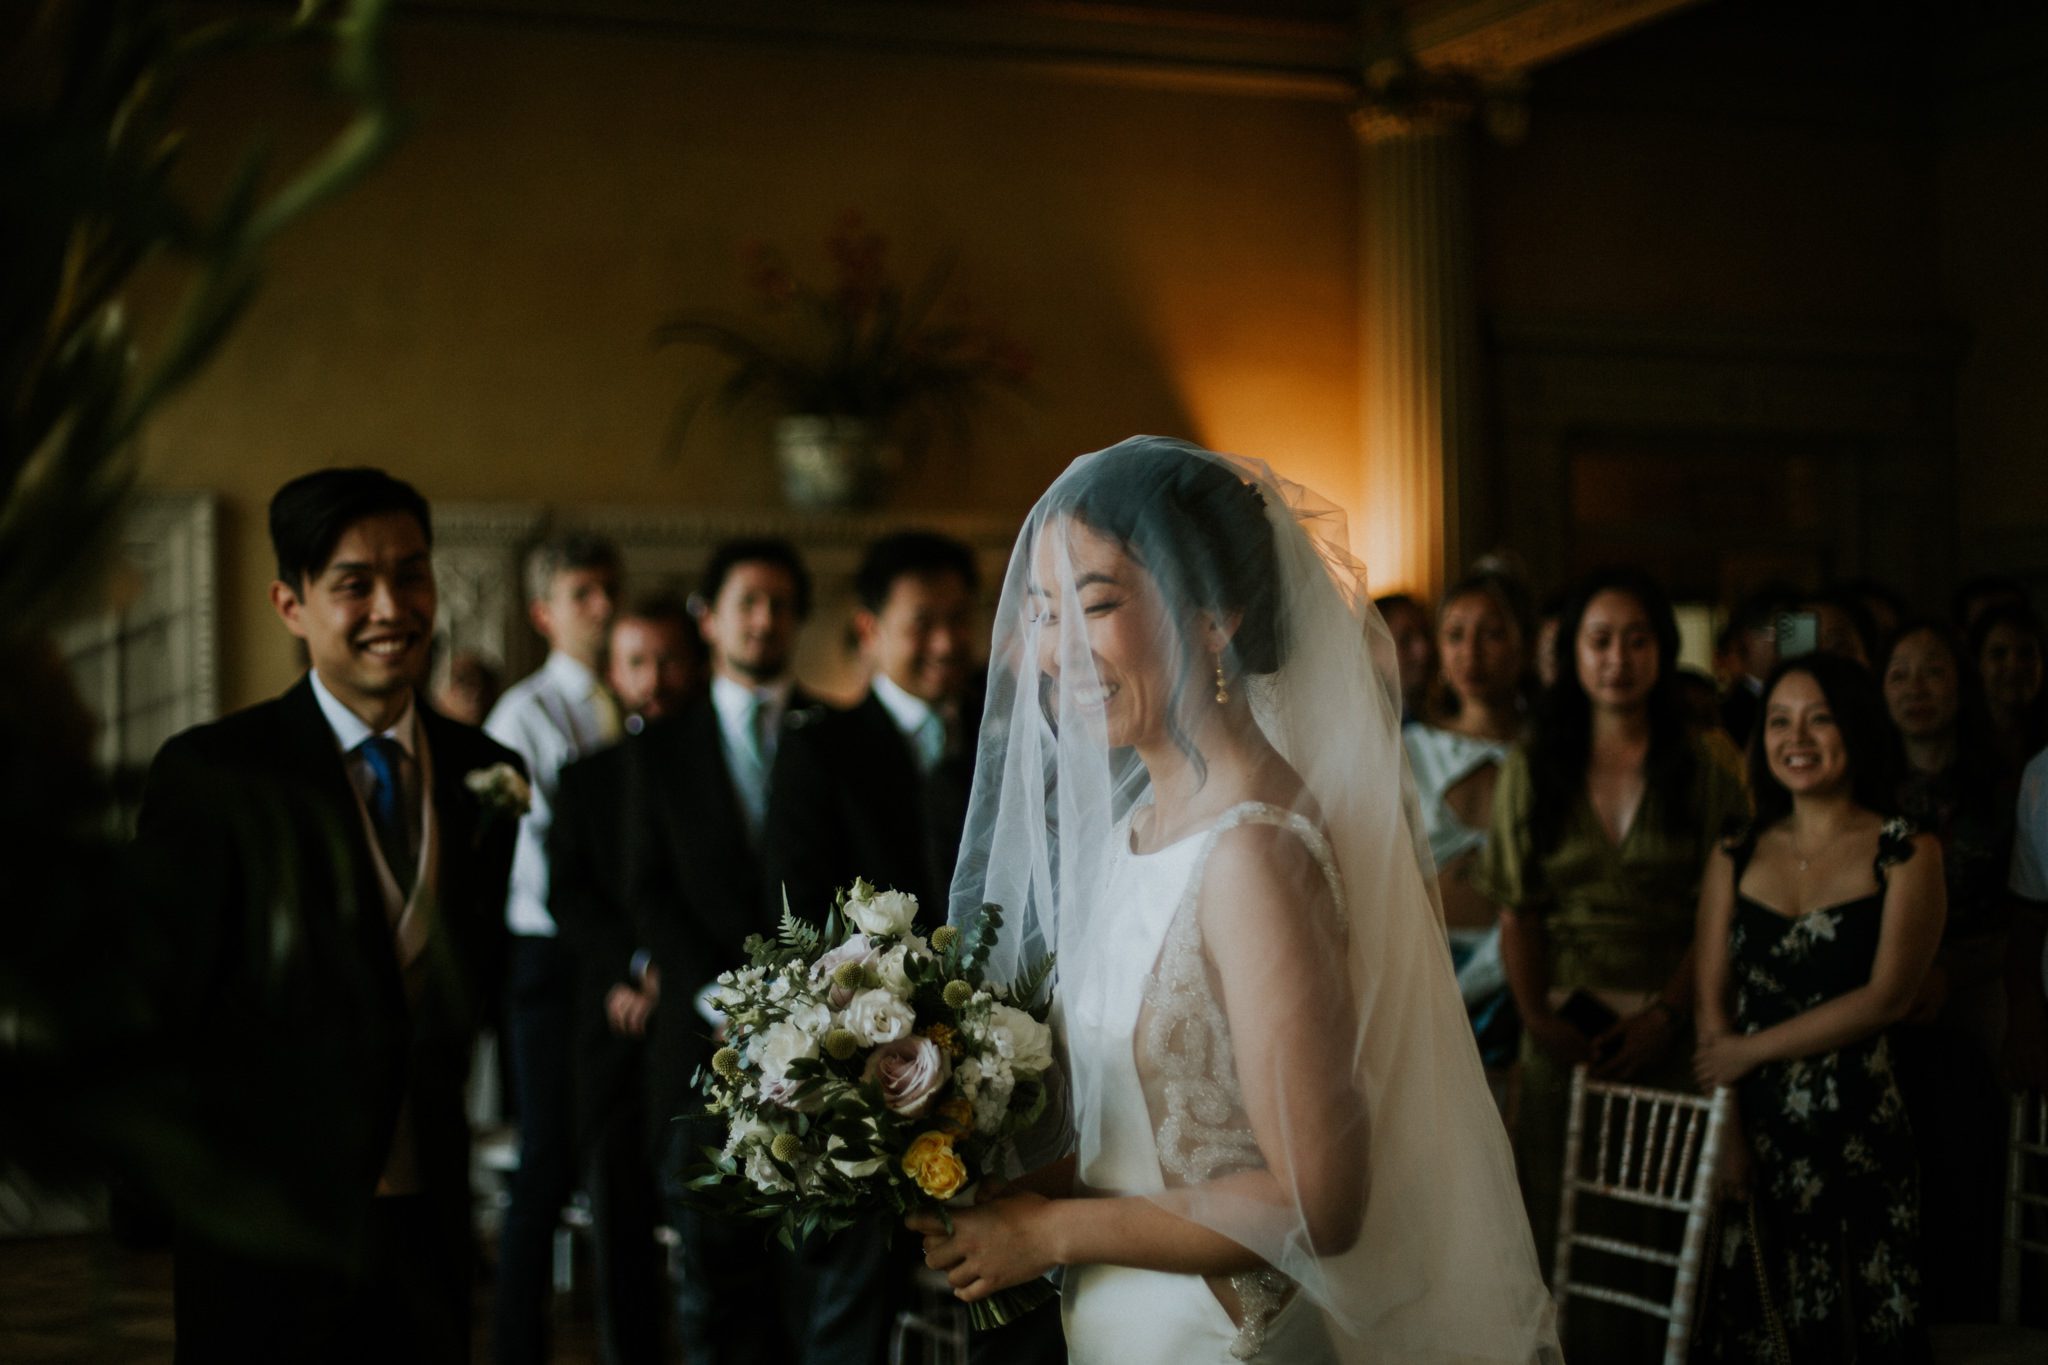 The bride enters the ceremony space at Hampton Court House in London